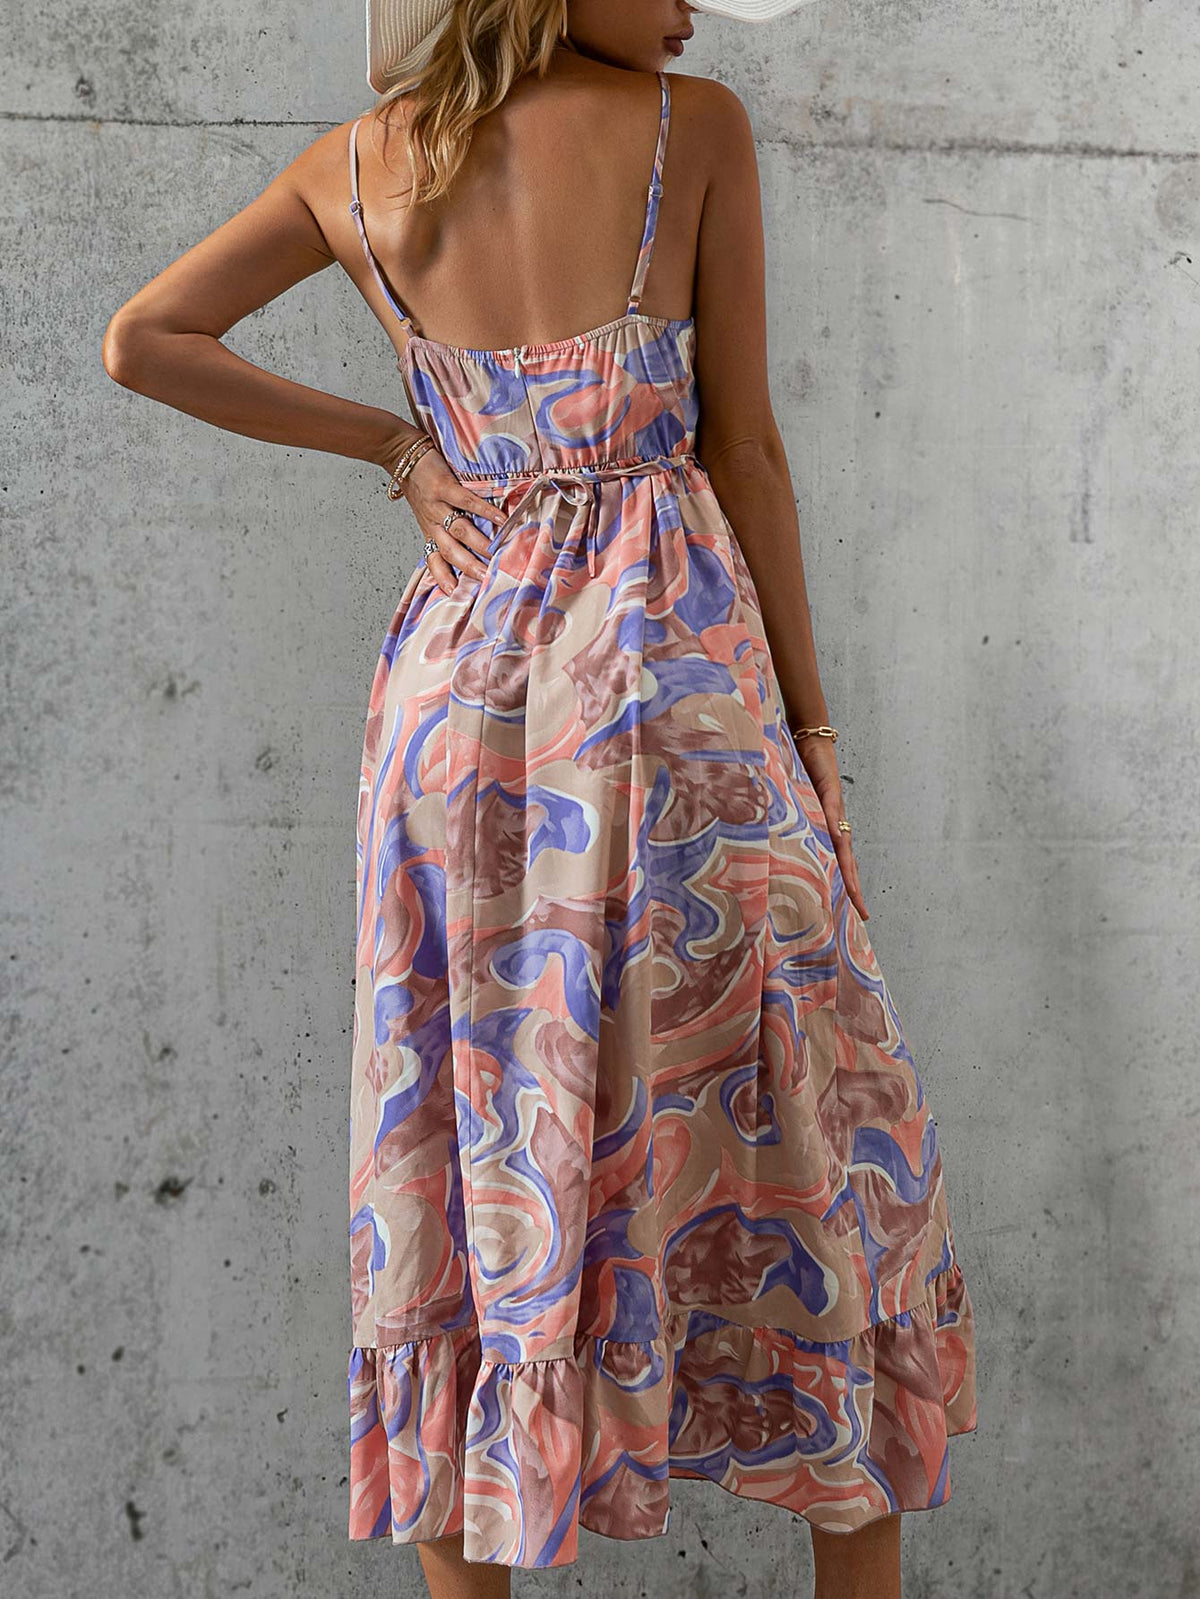 Belted Floral Cami Dress with Ruffle Hem - 